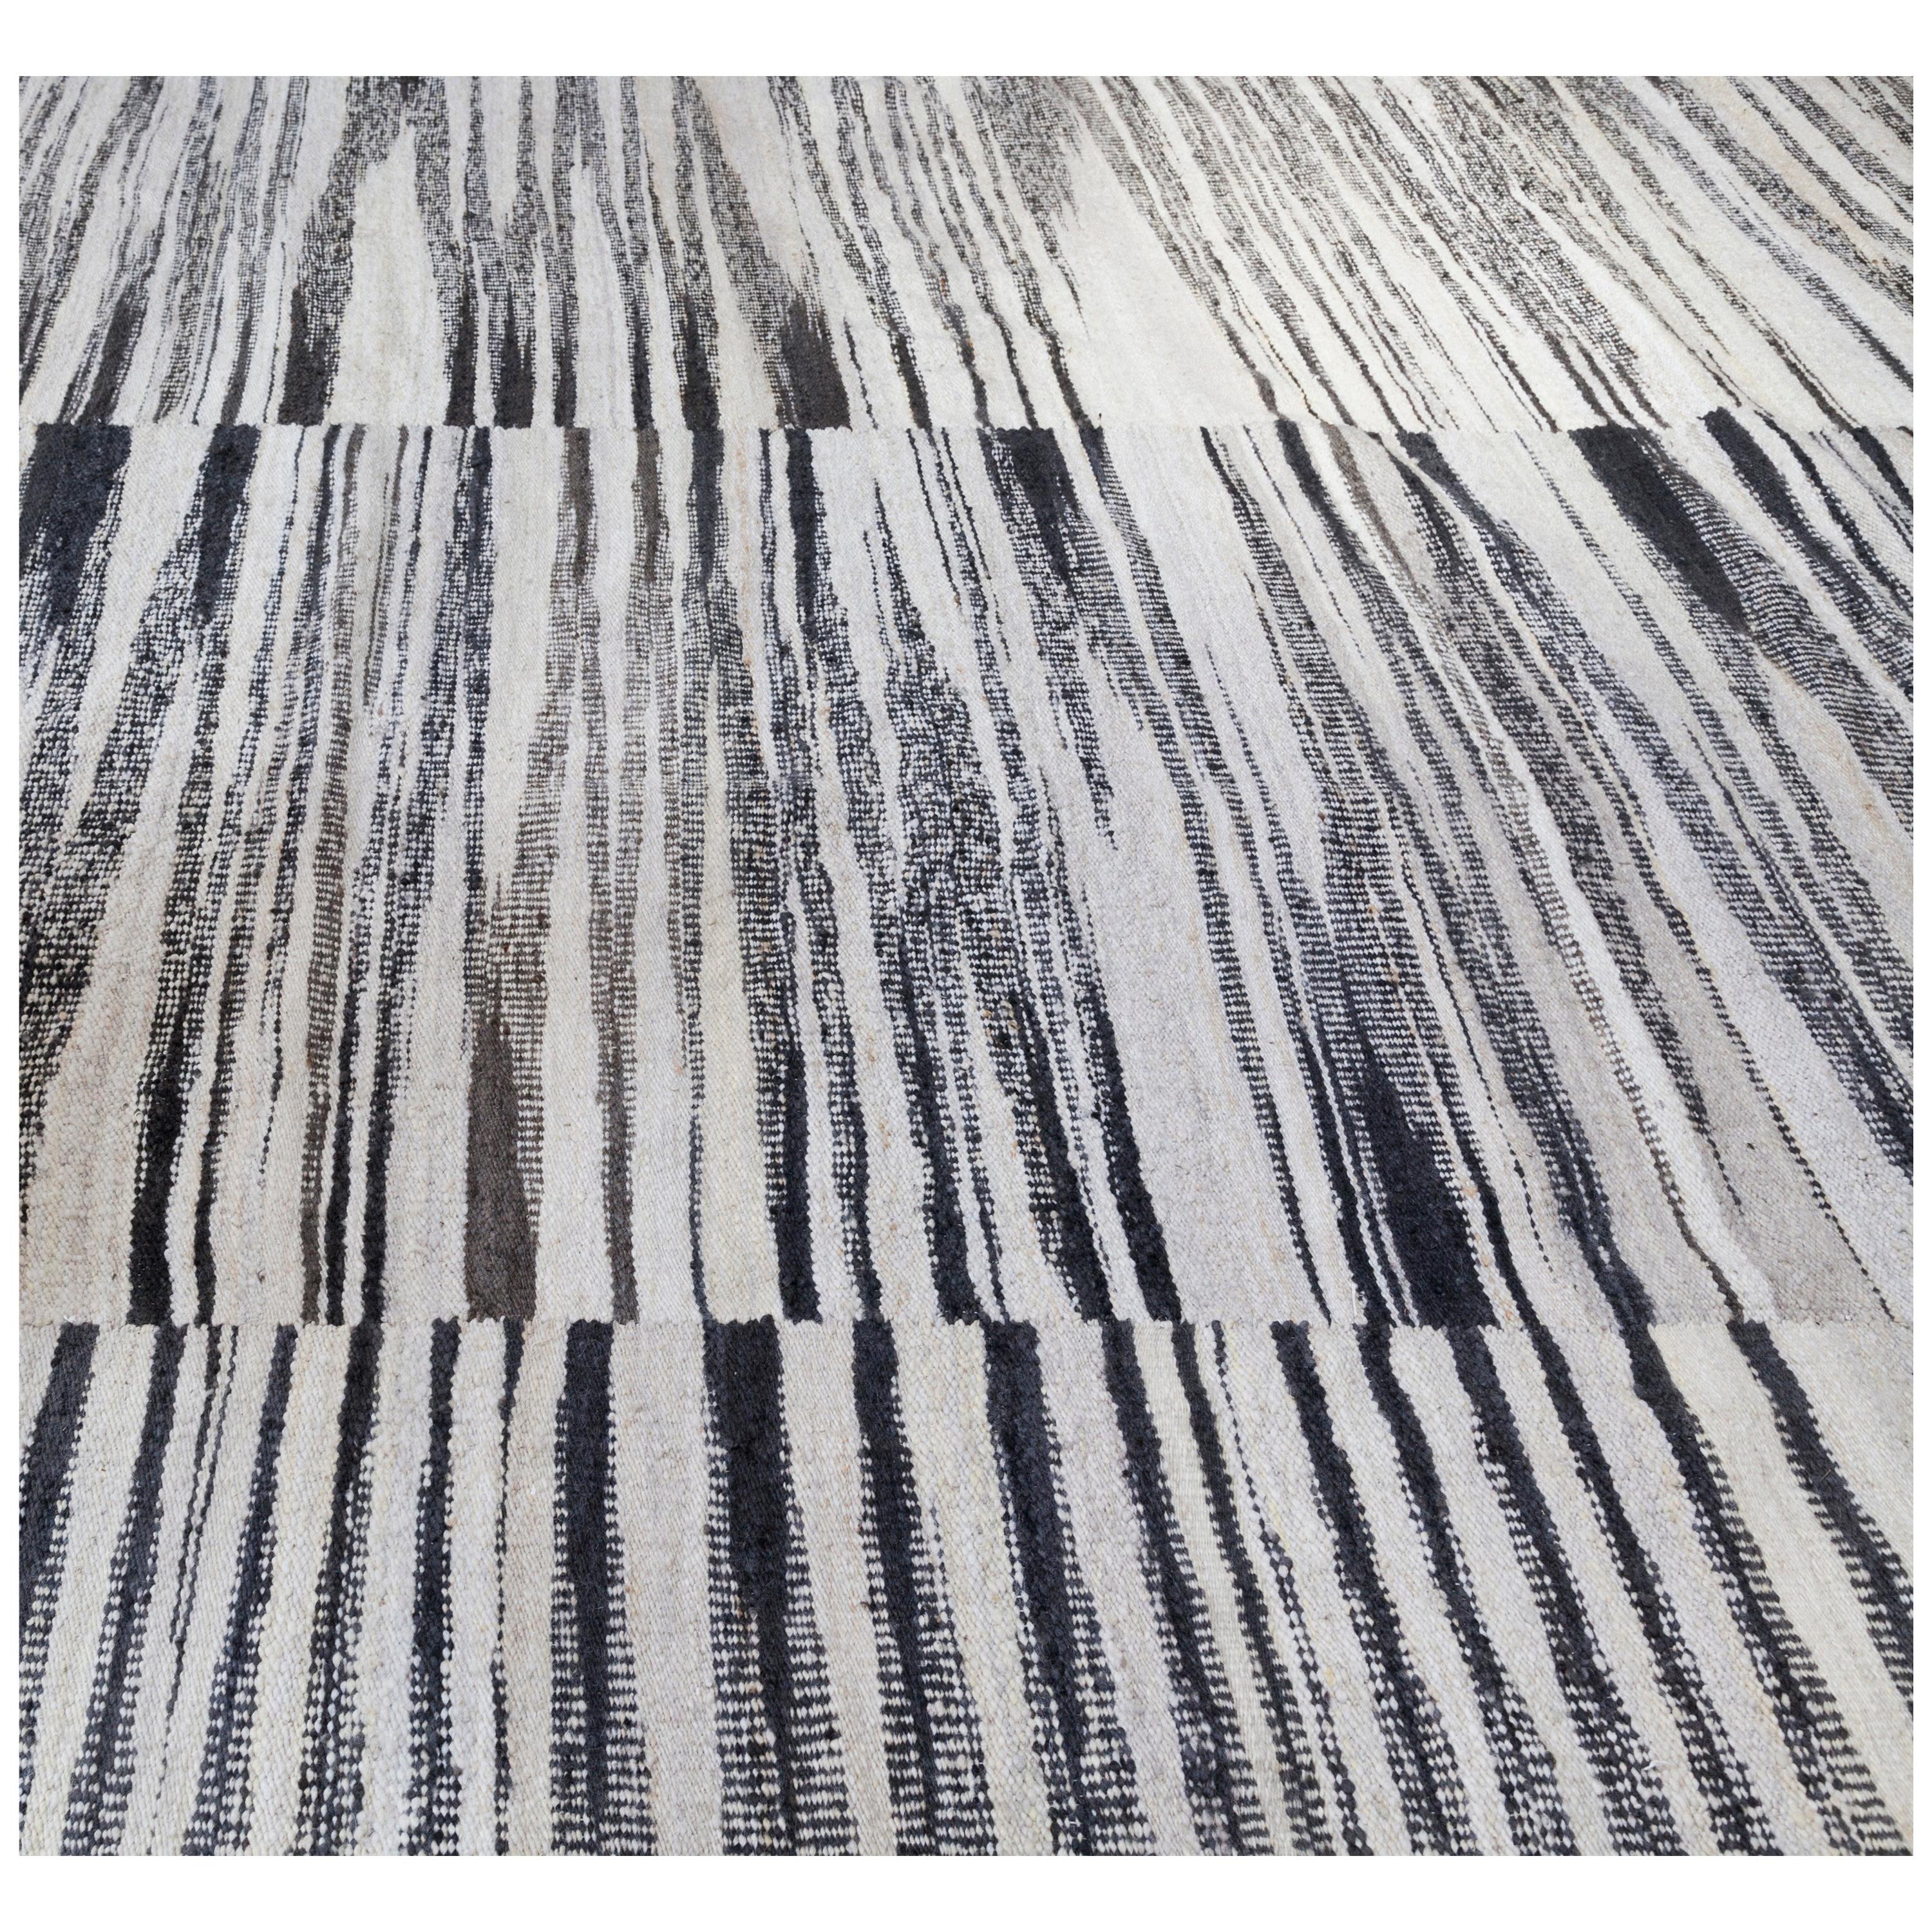 Handwoven Wool Flatweave Rug in Black and White Graphic Pattern